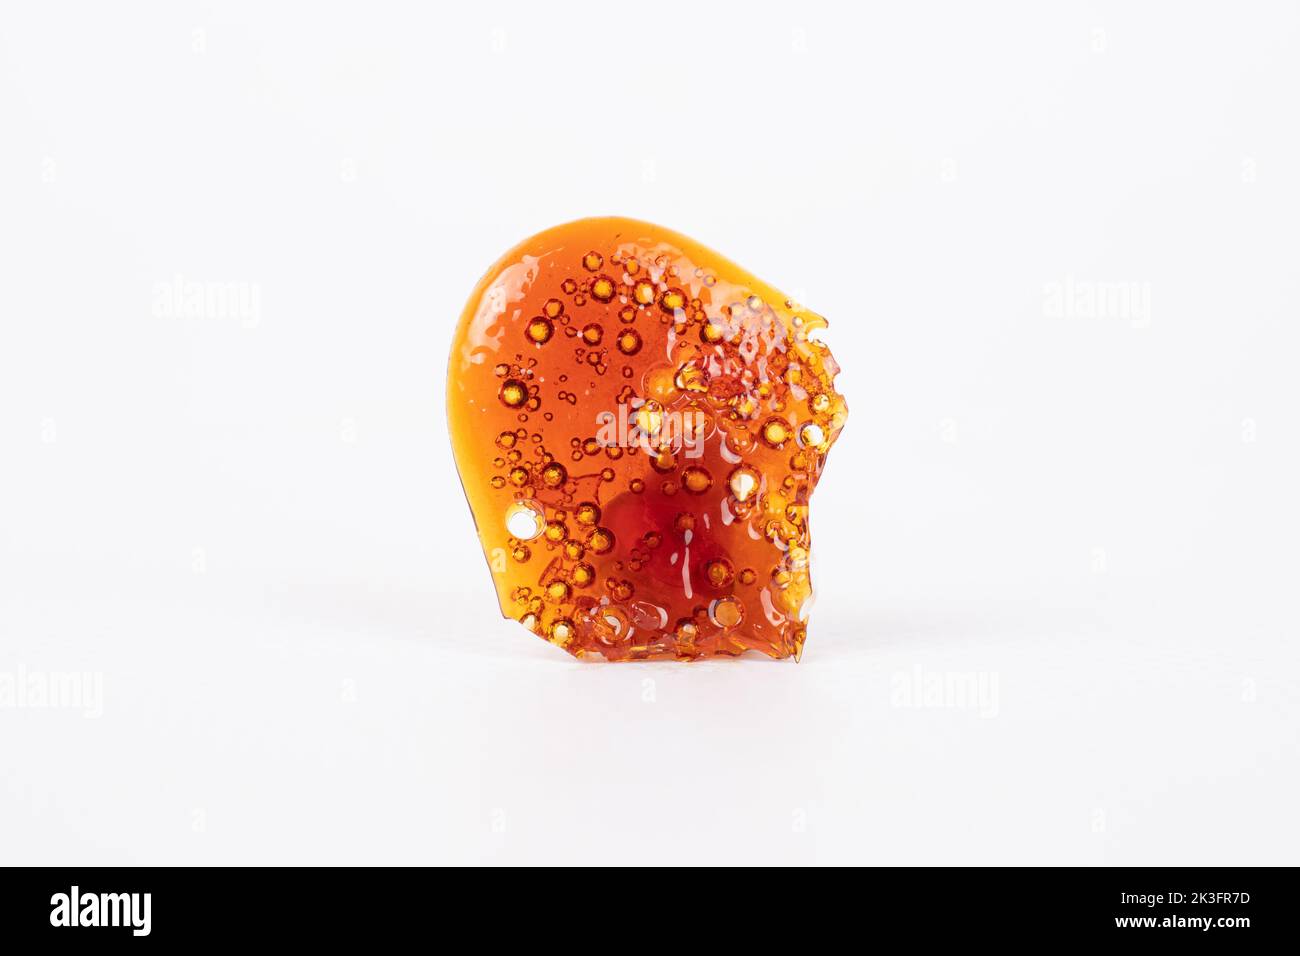 golden isolated piece of cannabis wax, shatter dab closeup. Stock Photo